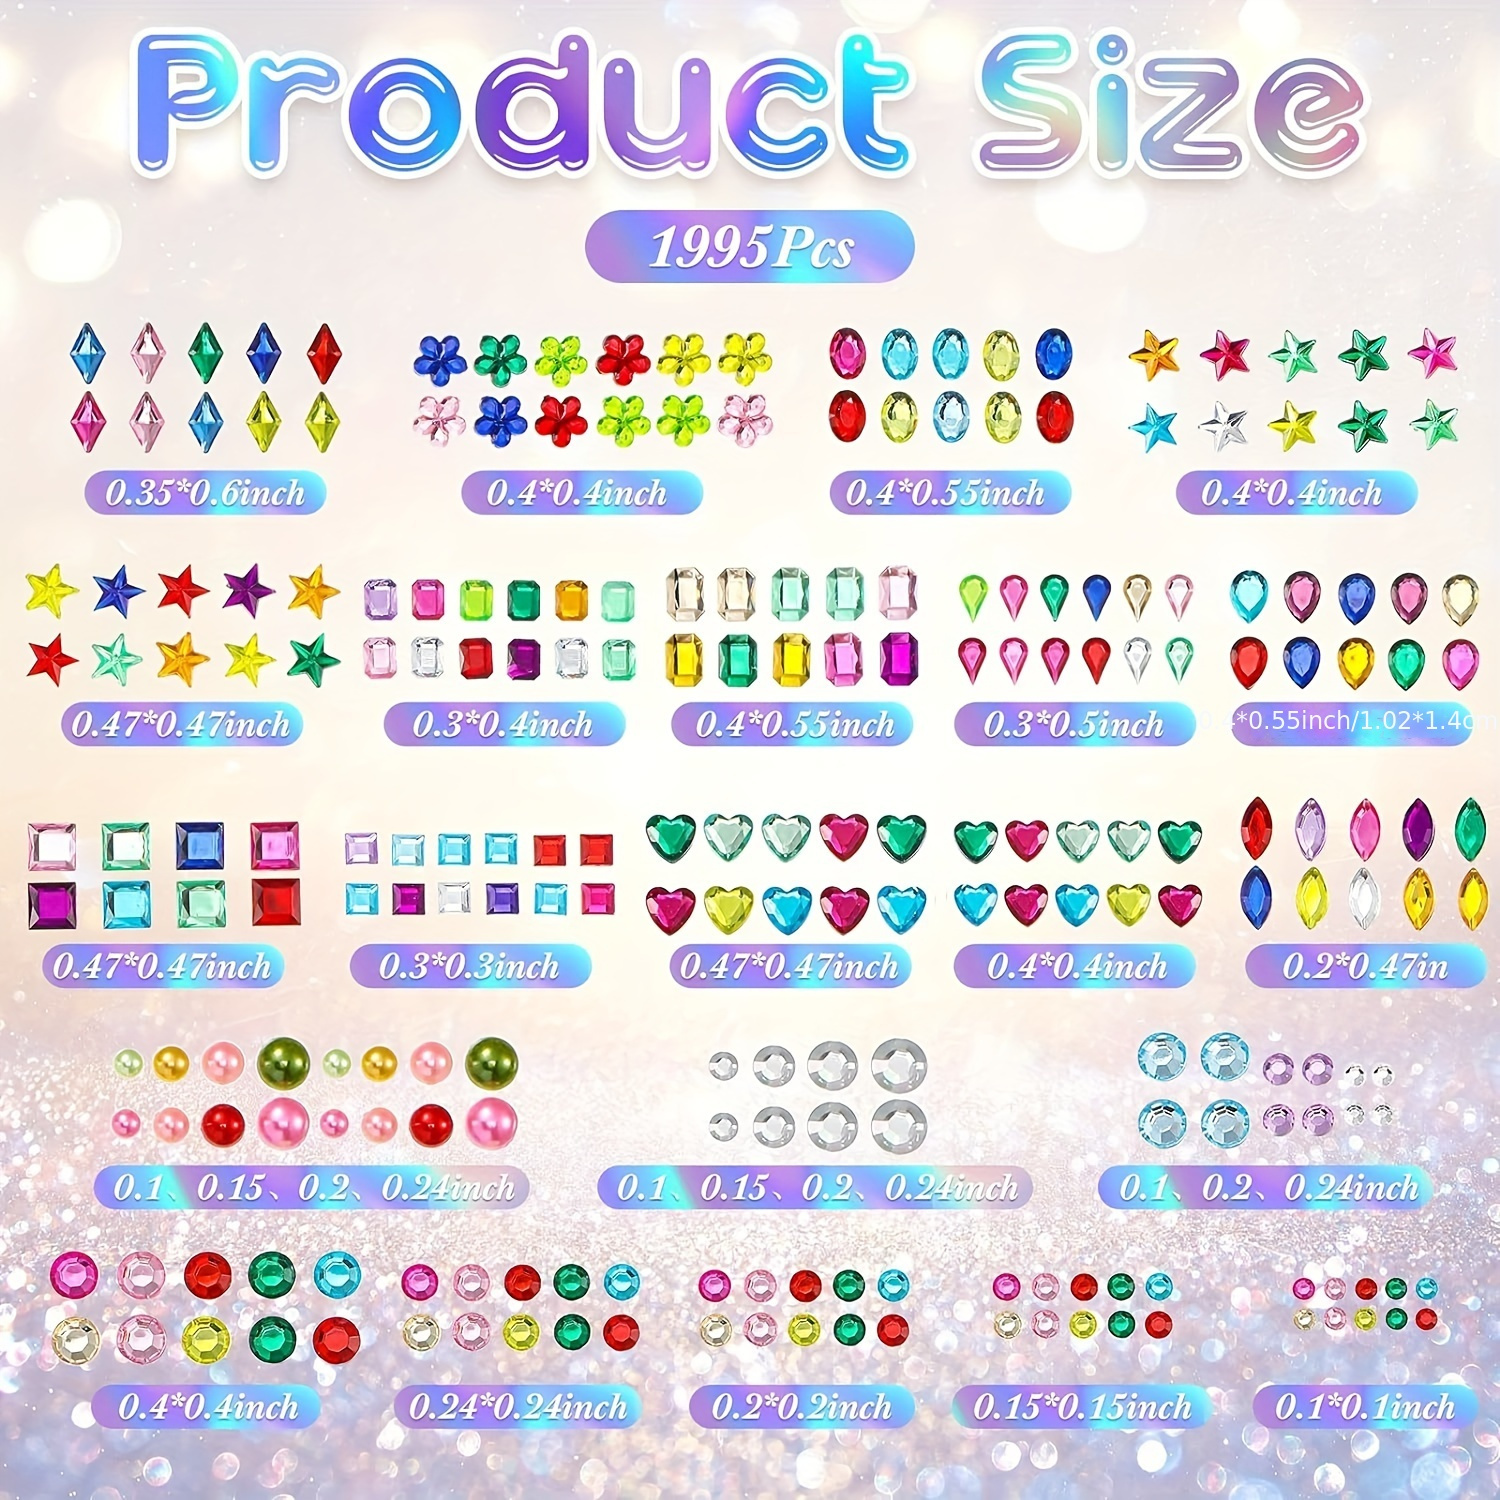 1995pcs Jewels Stickers Assorted Shapes Gem Stickers Bling Multicolor  Rhinestone Stickers Self Adhesive Face Gems Stick On Jewels For Crafts DIY  Makeu